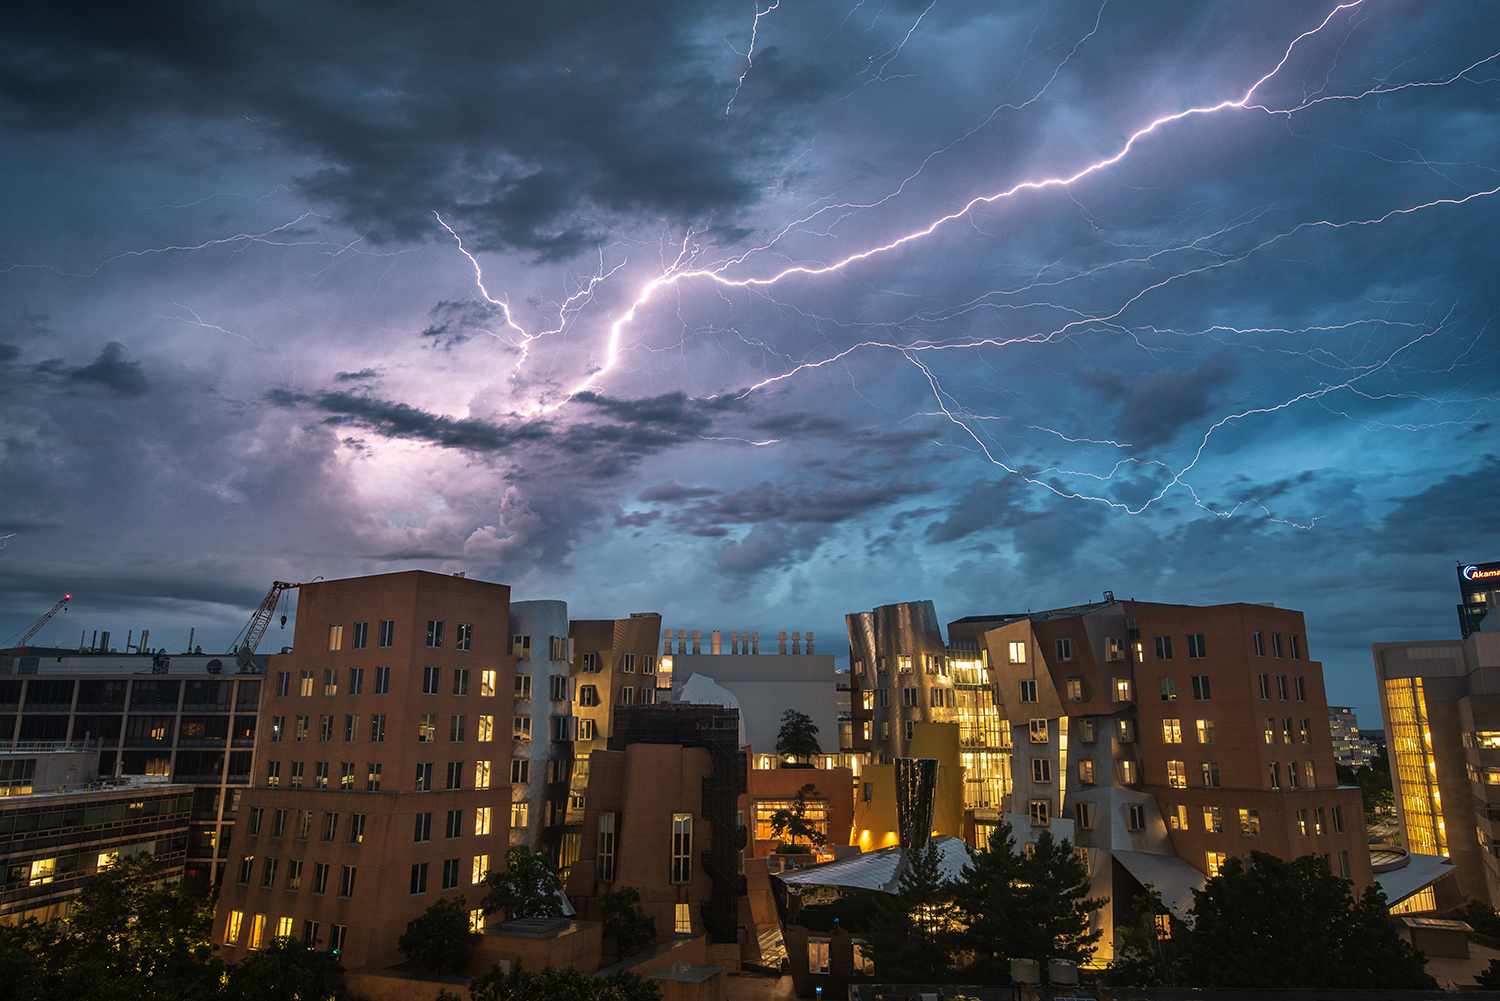 Scene at MIT: In a stroke of lightning, the beauty of nature and architecture | MIT News